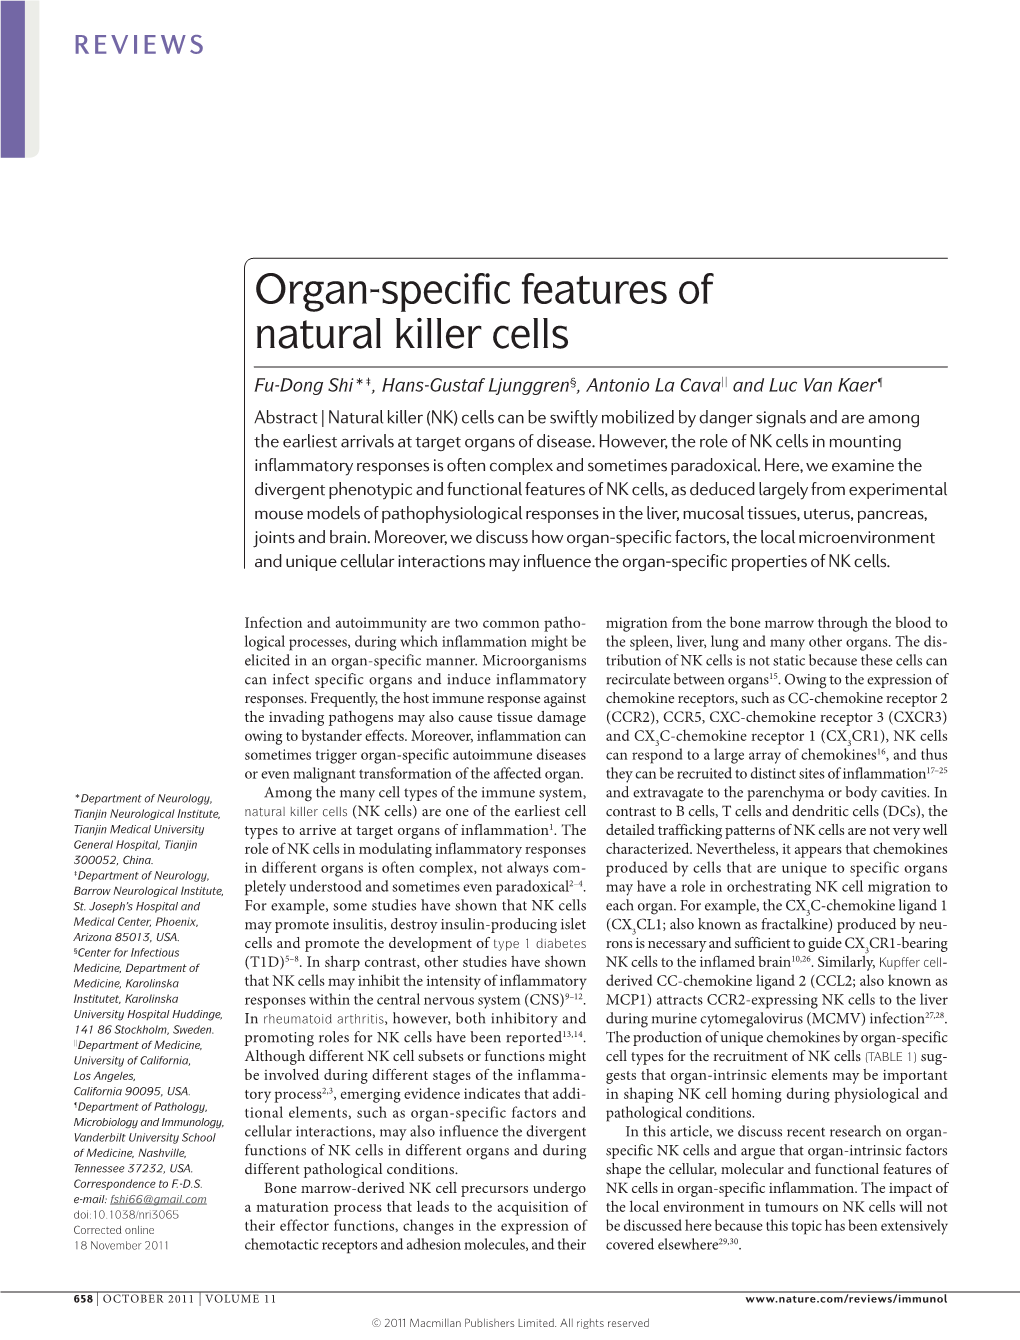 Organ-Specific Features of Natural Killer Cells